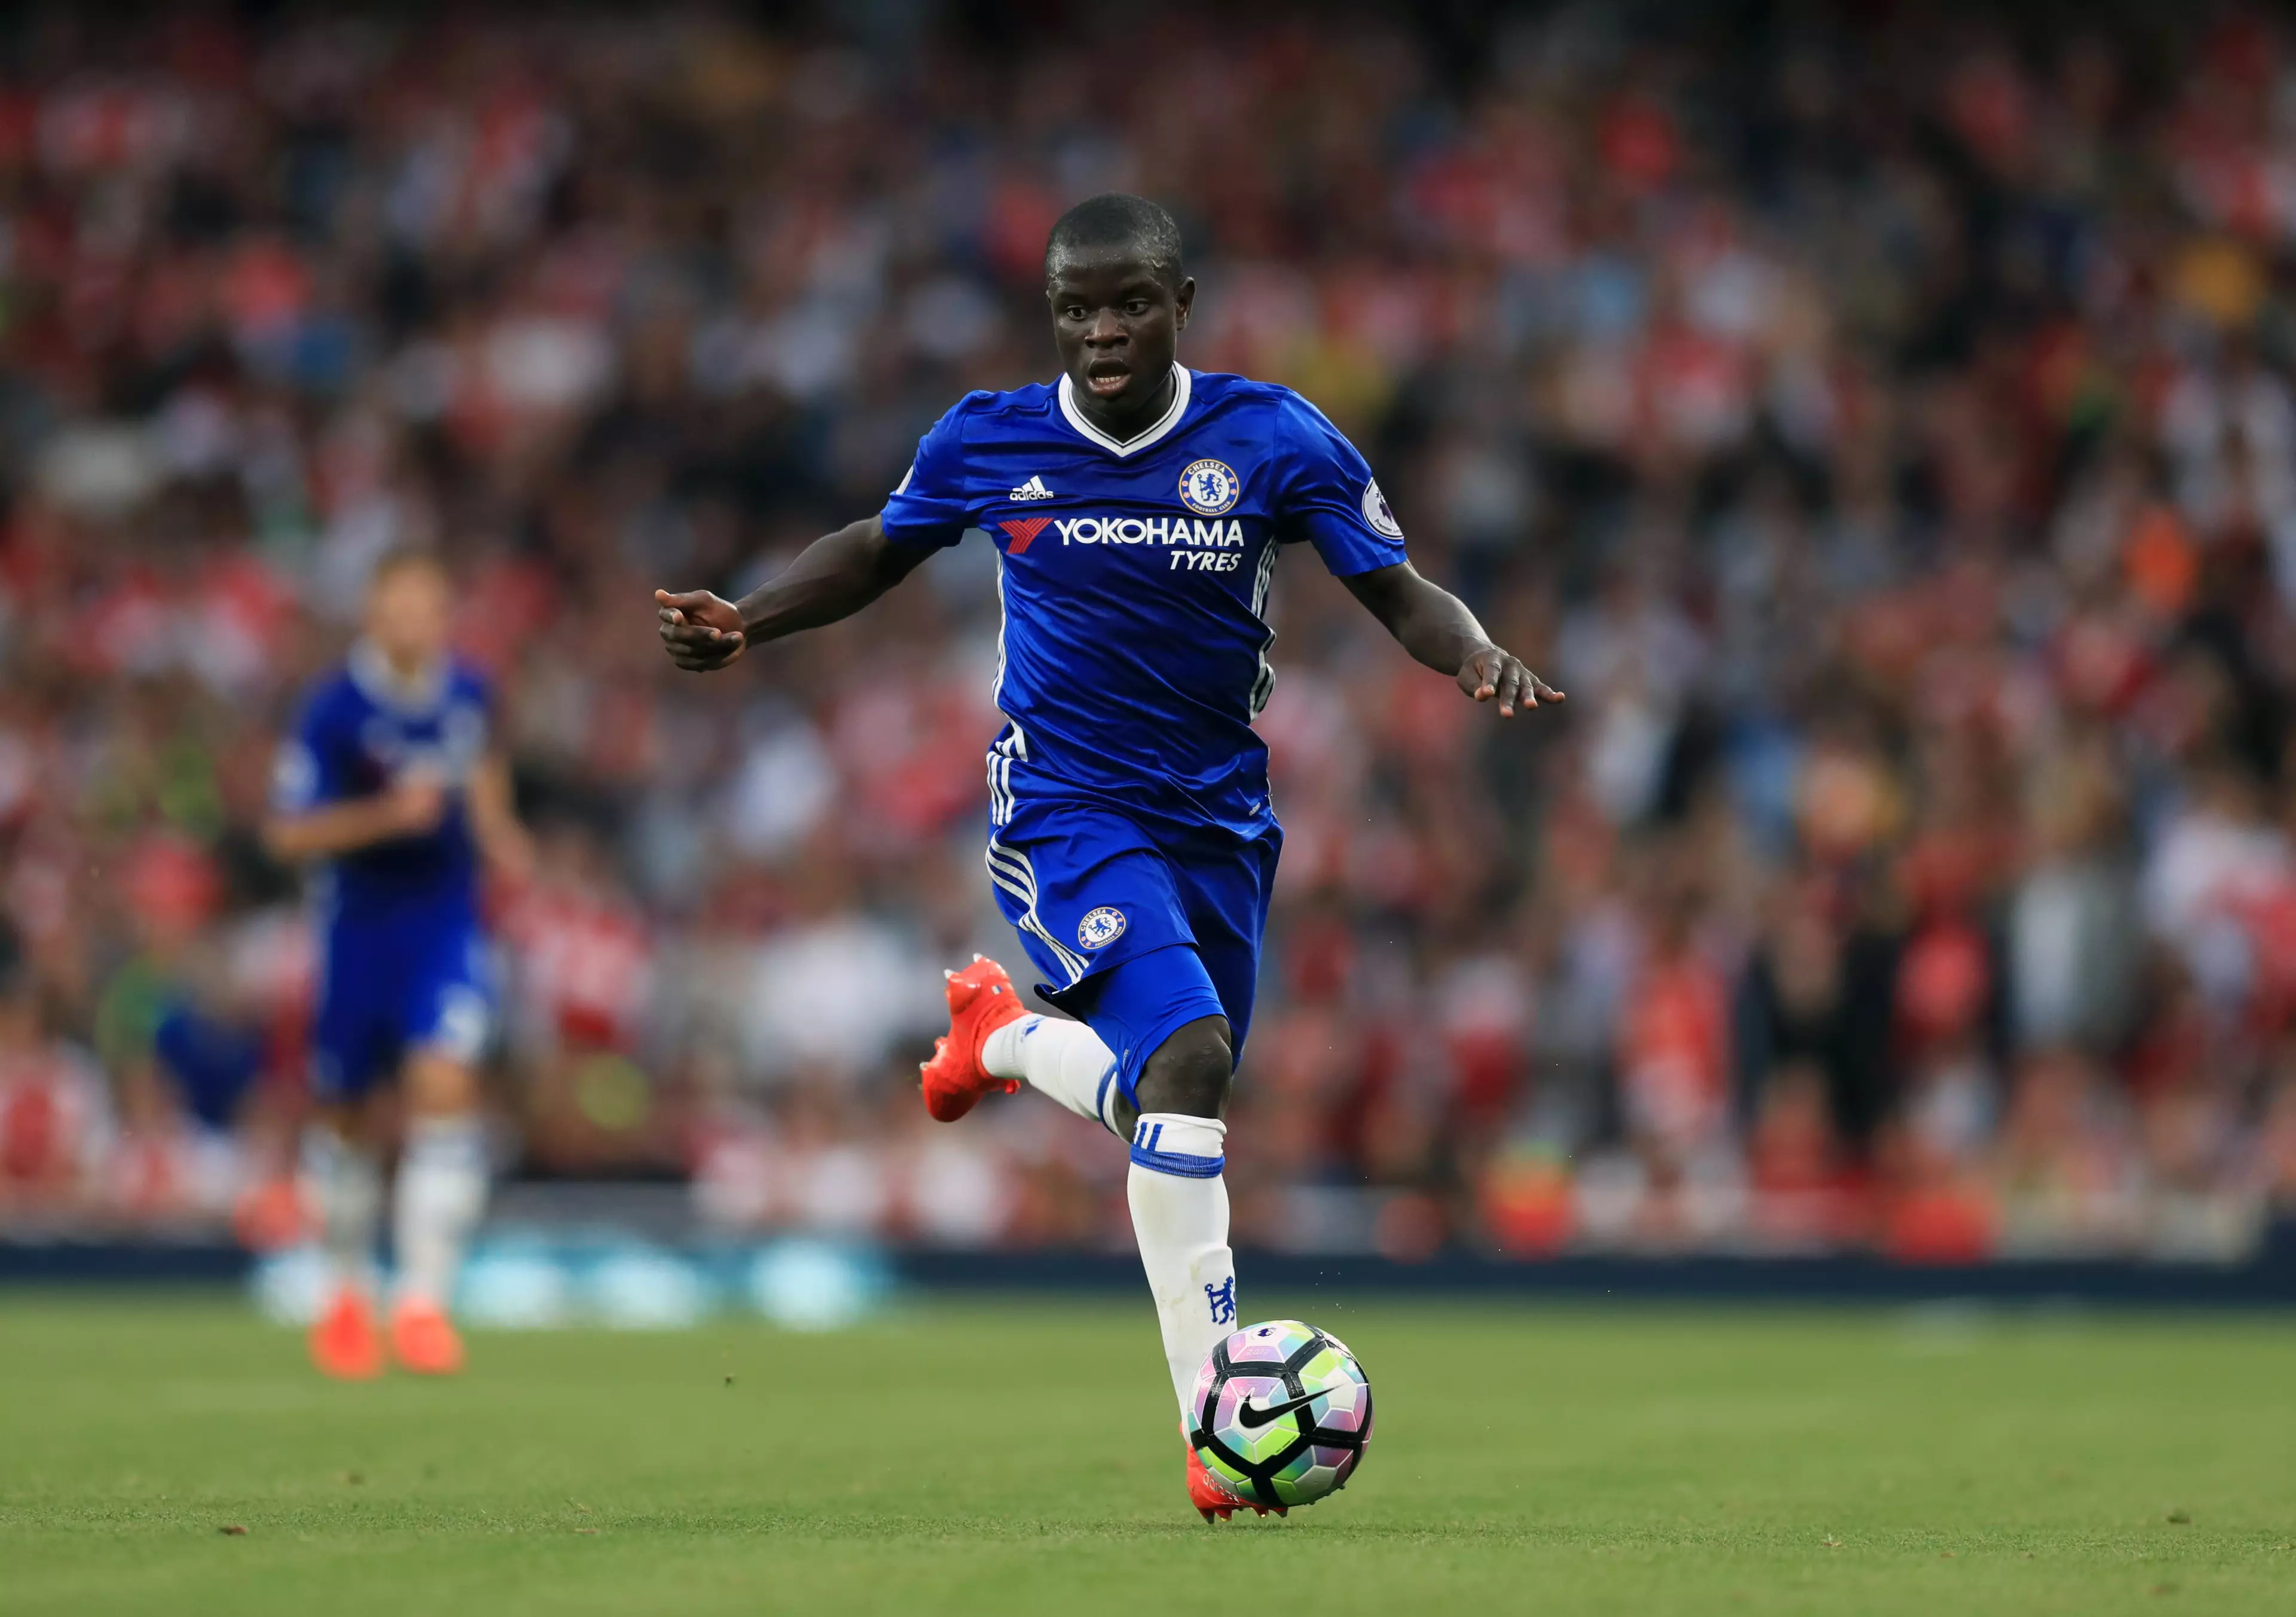 Chelsea's N'Golo Kante Reveals The Secret Behind His Incredible Form